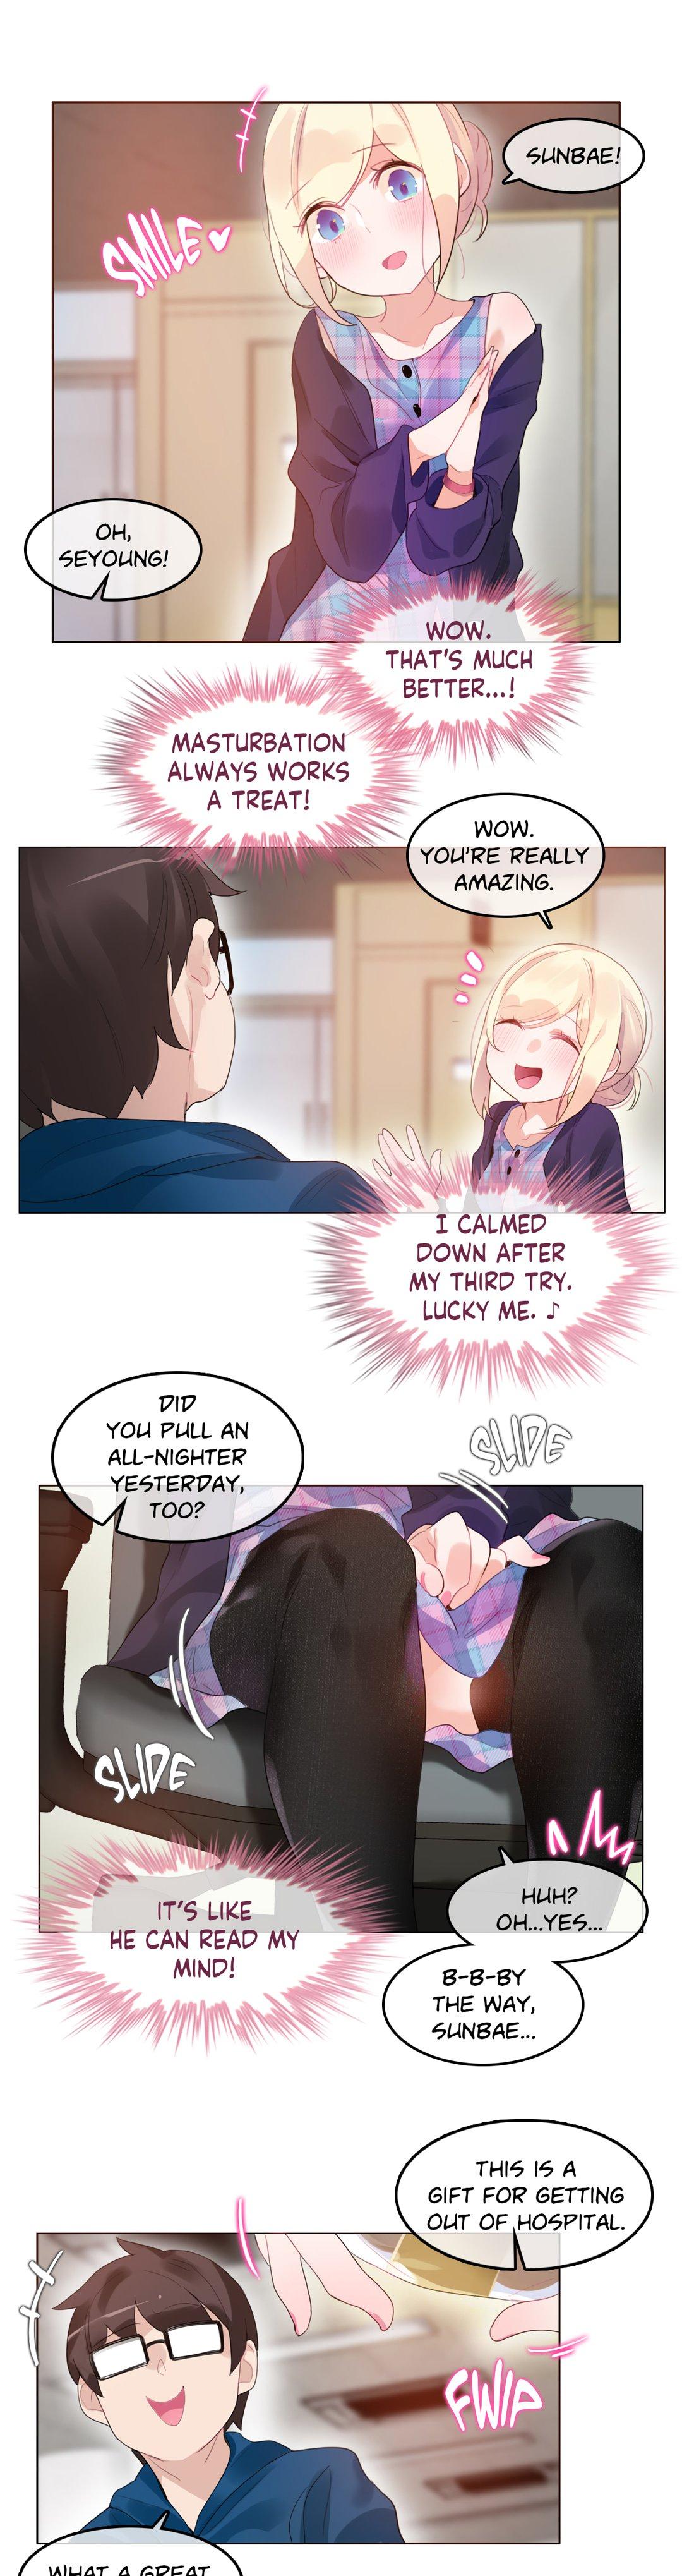 A Pervert's Daily Life • Chapter 51-55 44